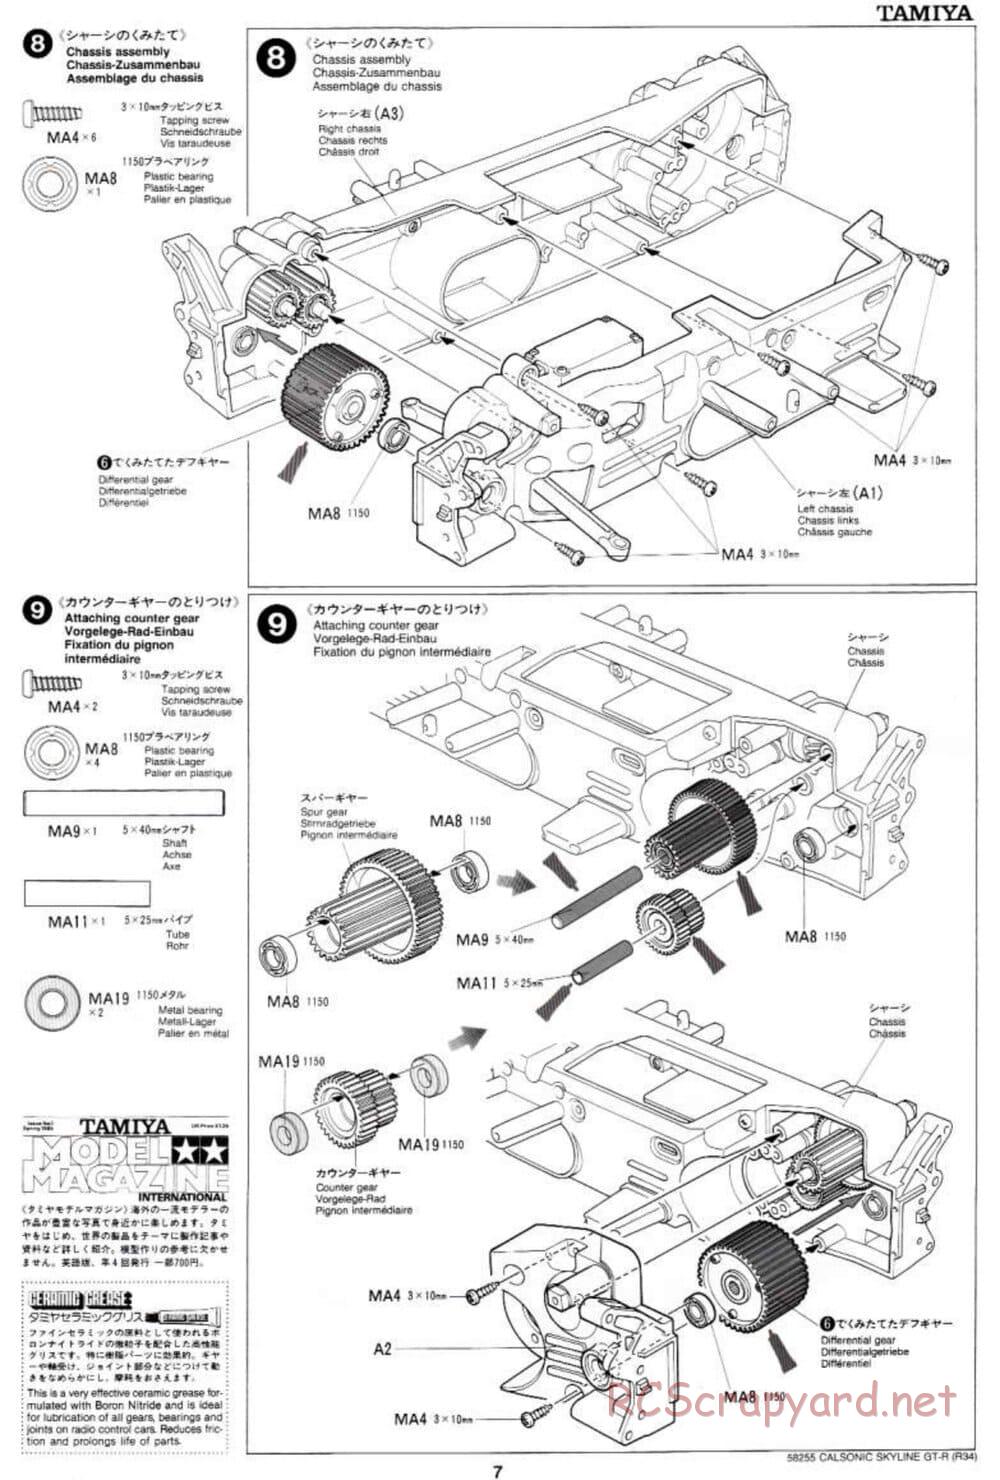 Tamiya - Calsonic Skyline GT-R (R34) - TL-01 Chassis - Manual - Page 7